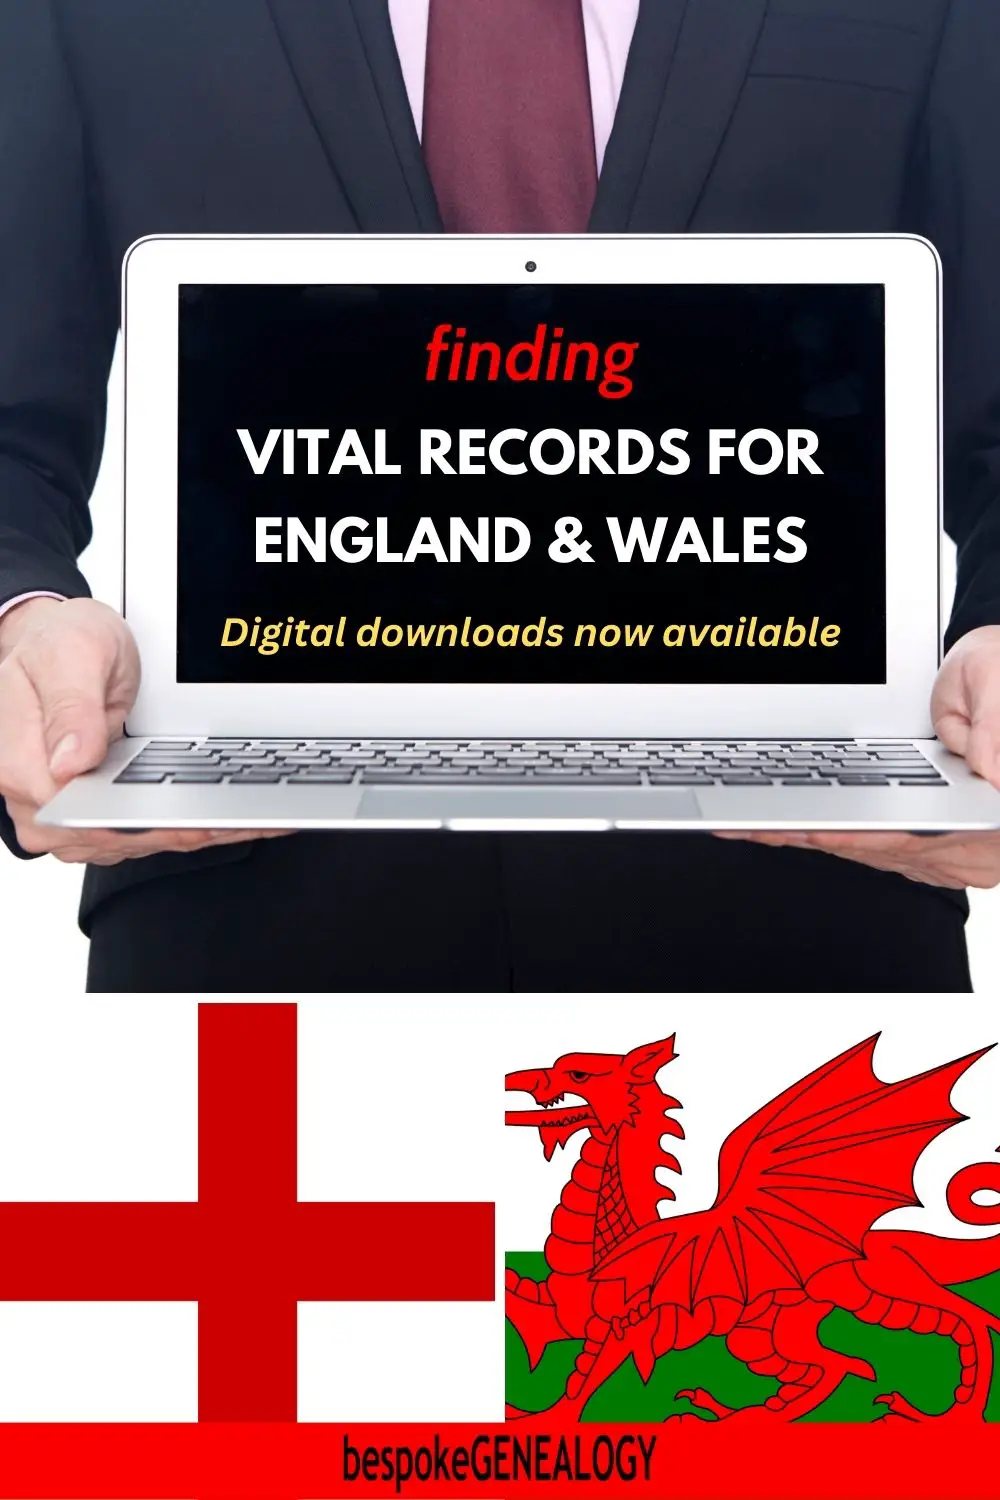 Finding vital records for England and Wales. Image of a man holding a laptop as well as English and Welsh flags.